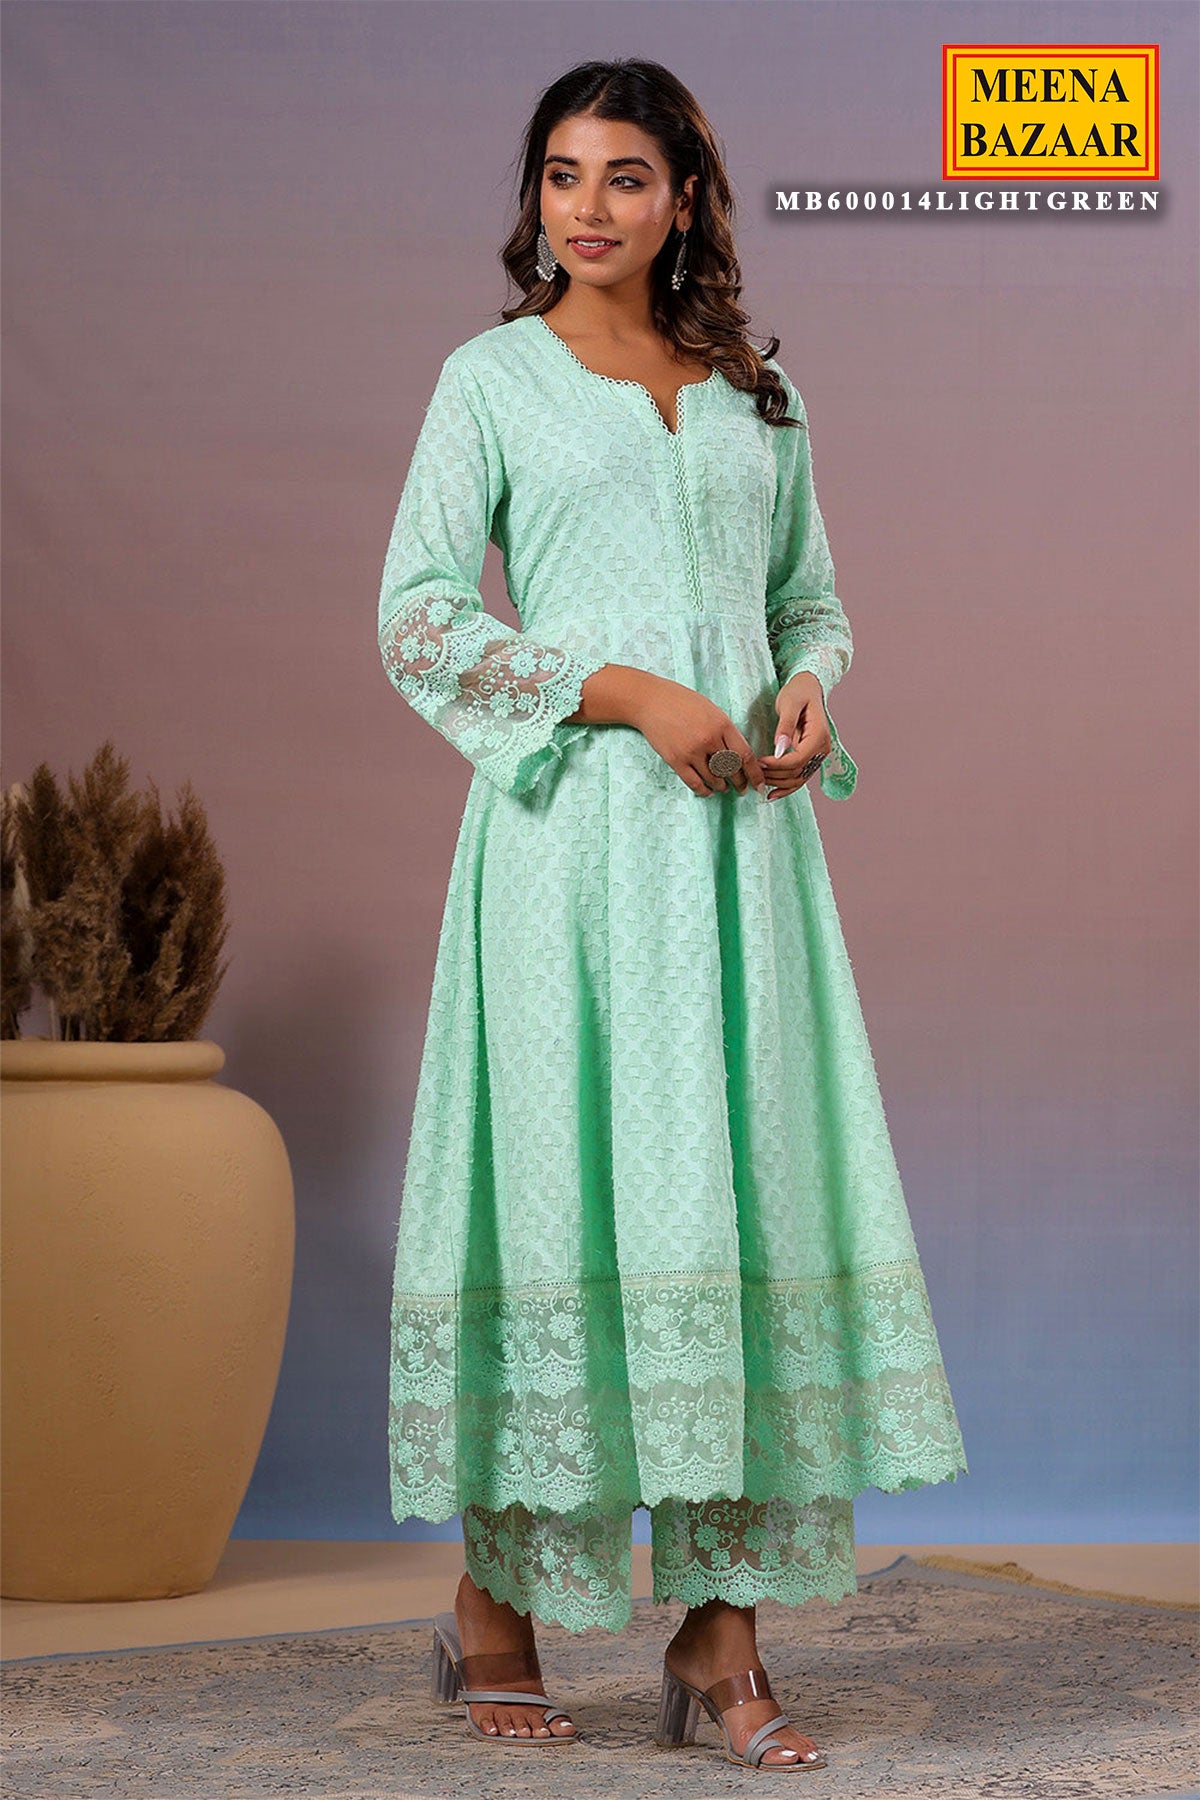 Light Green Cotton Kurti with Pants Threadwork, Zari, and Lace Embroidery